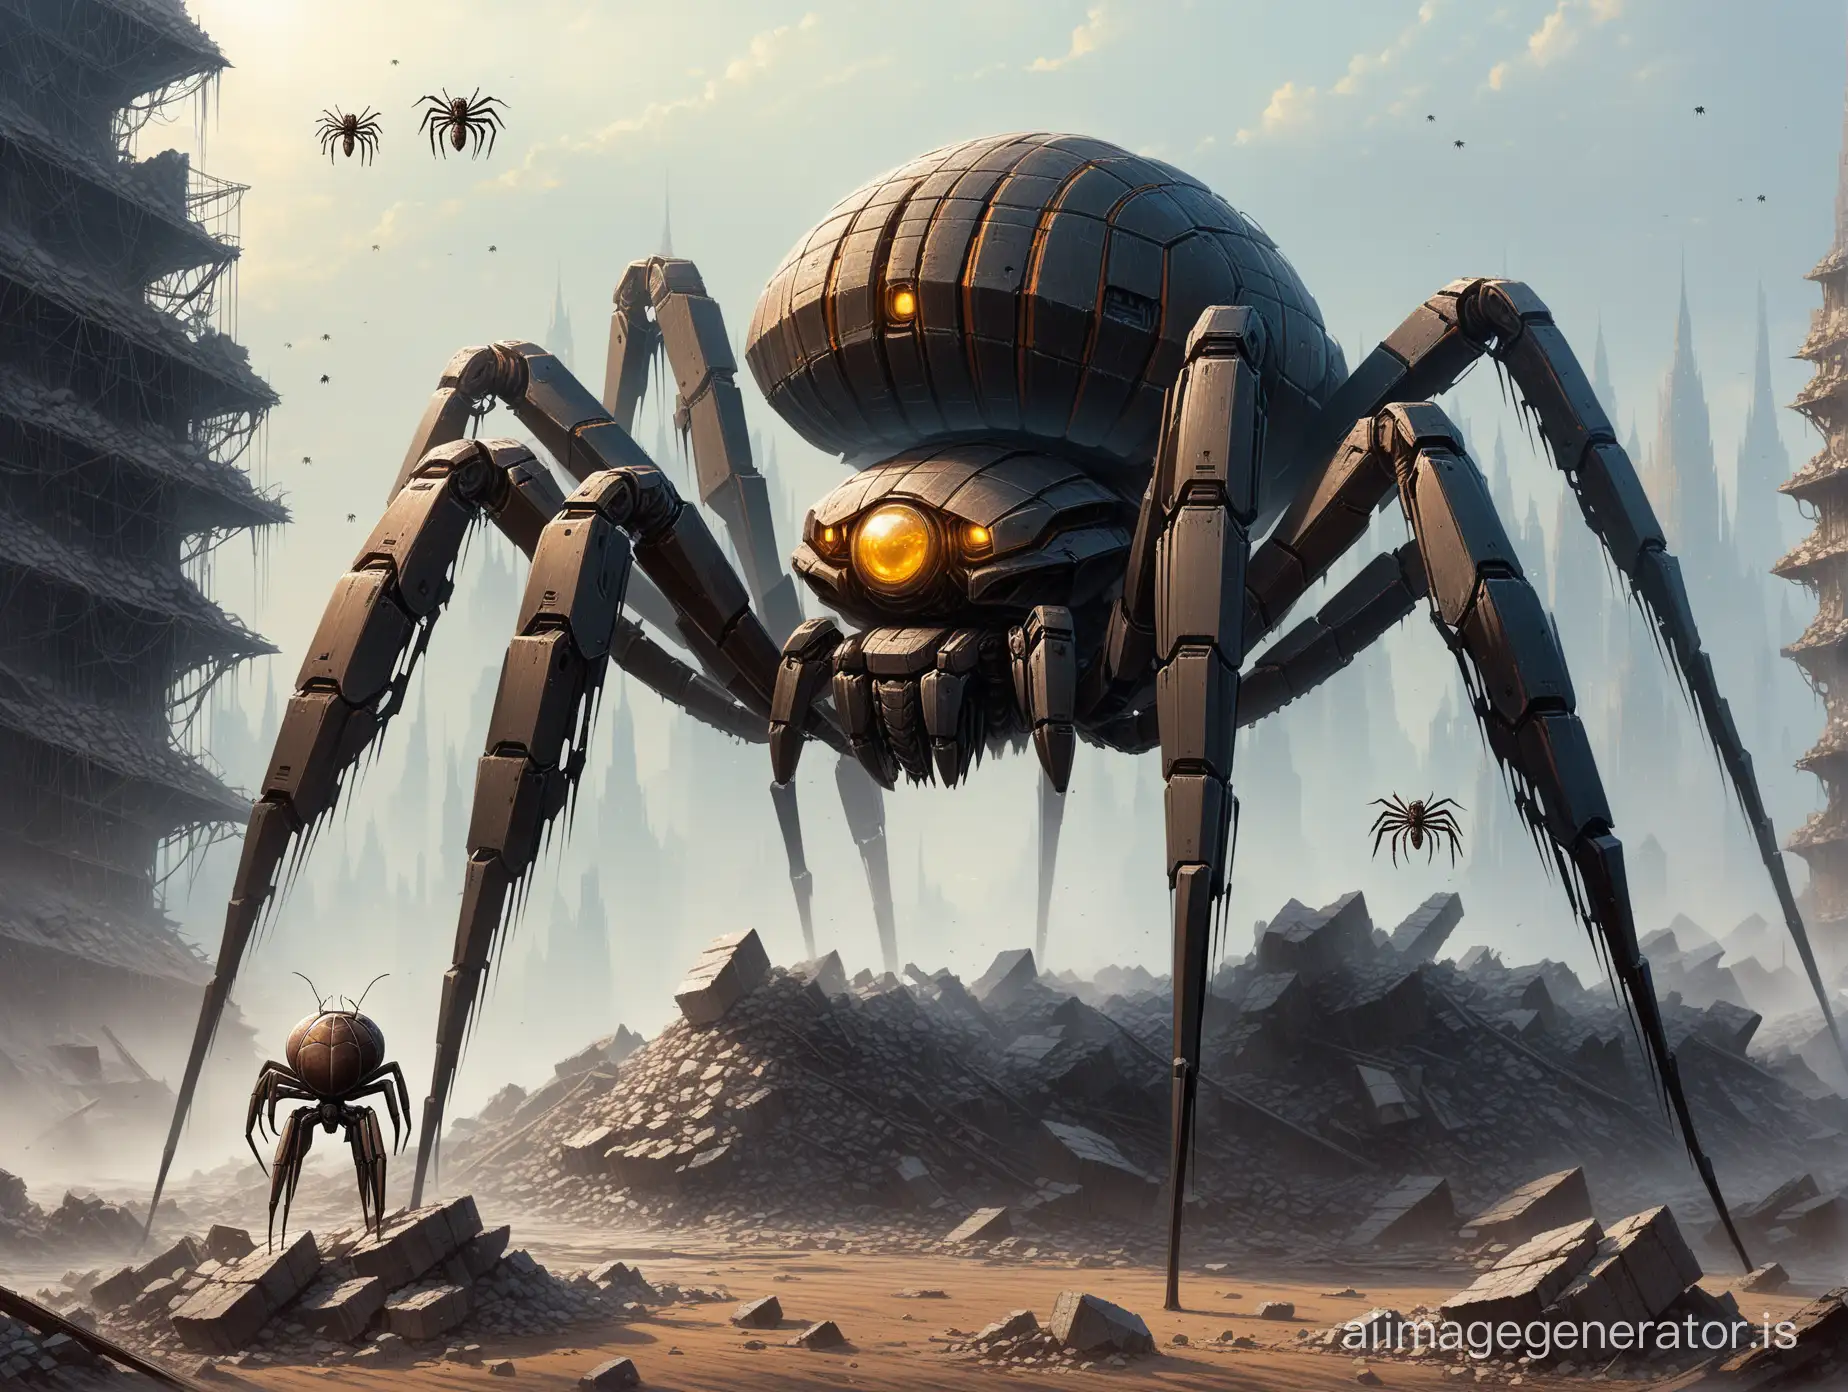 Giant-Spider-Concept-Art-Intricately-Detailed-RobotInsect-atop-Rubble